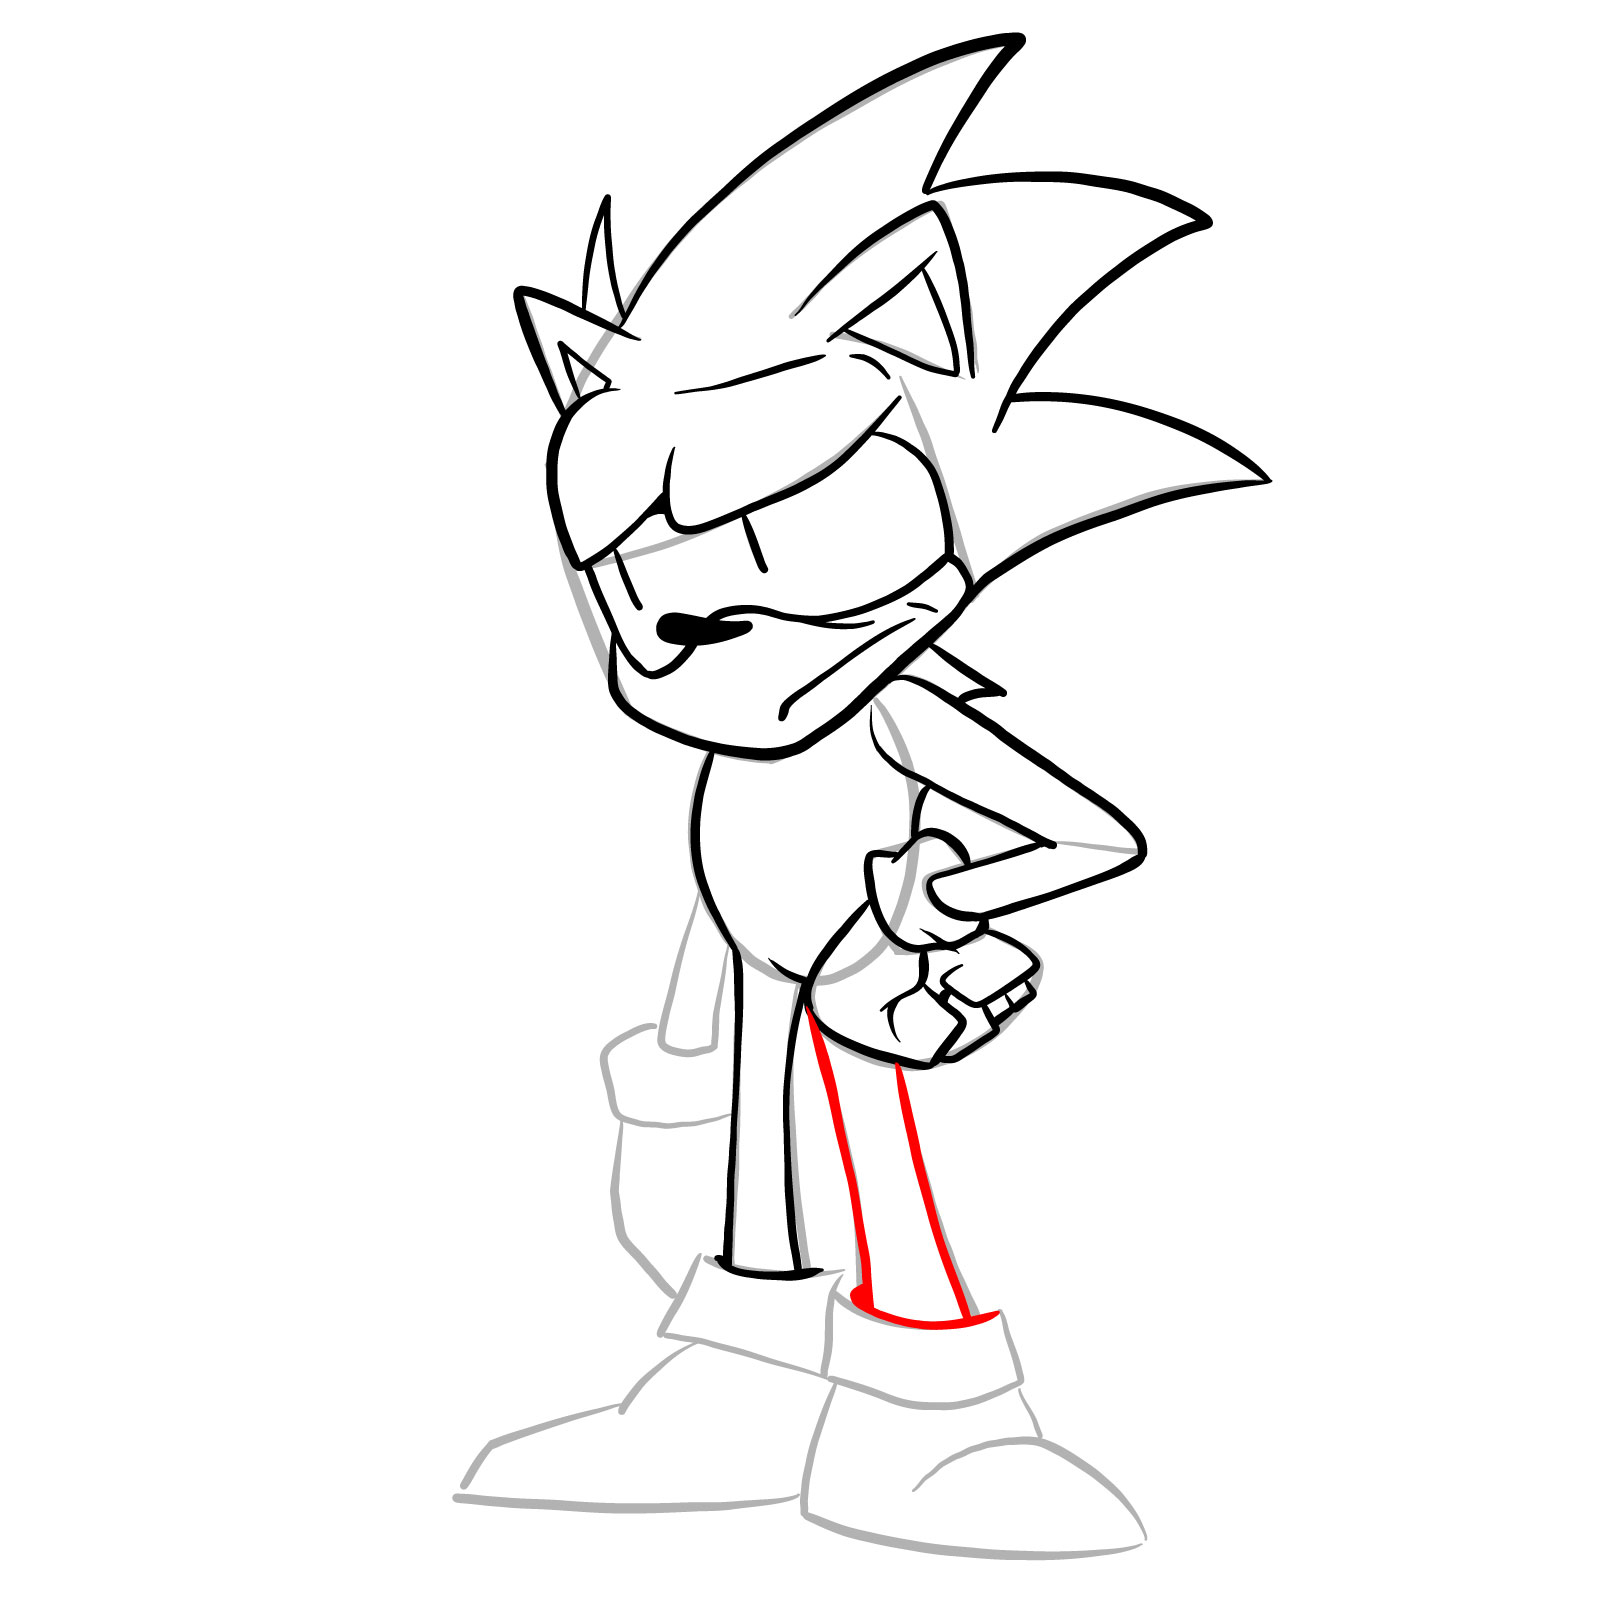 How to draw Sonic - FNF: Secret Histories - step 20